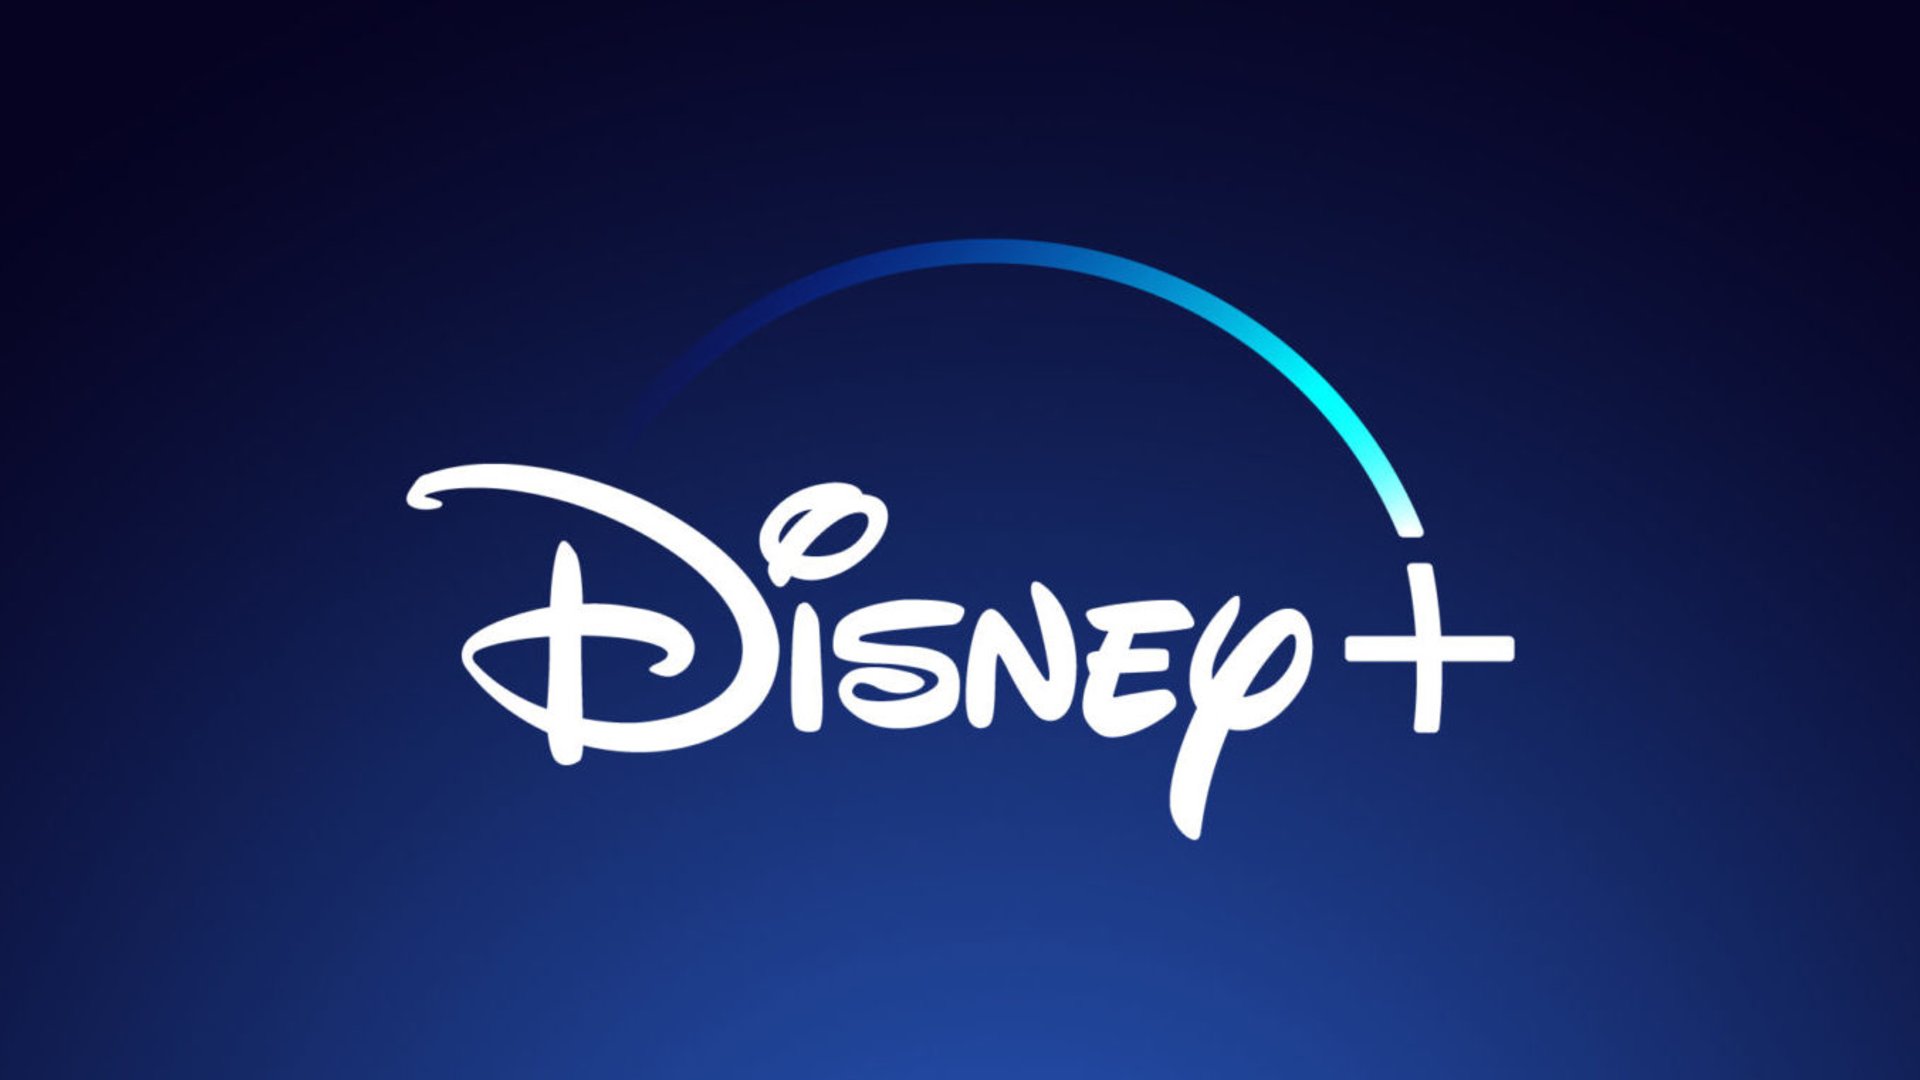 Hisense Smart TVs in South Africa Now Offer Disney+ in South Africa